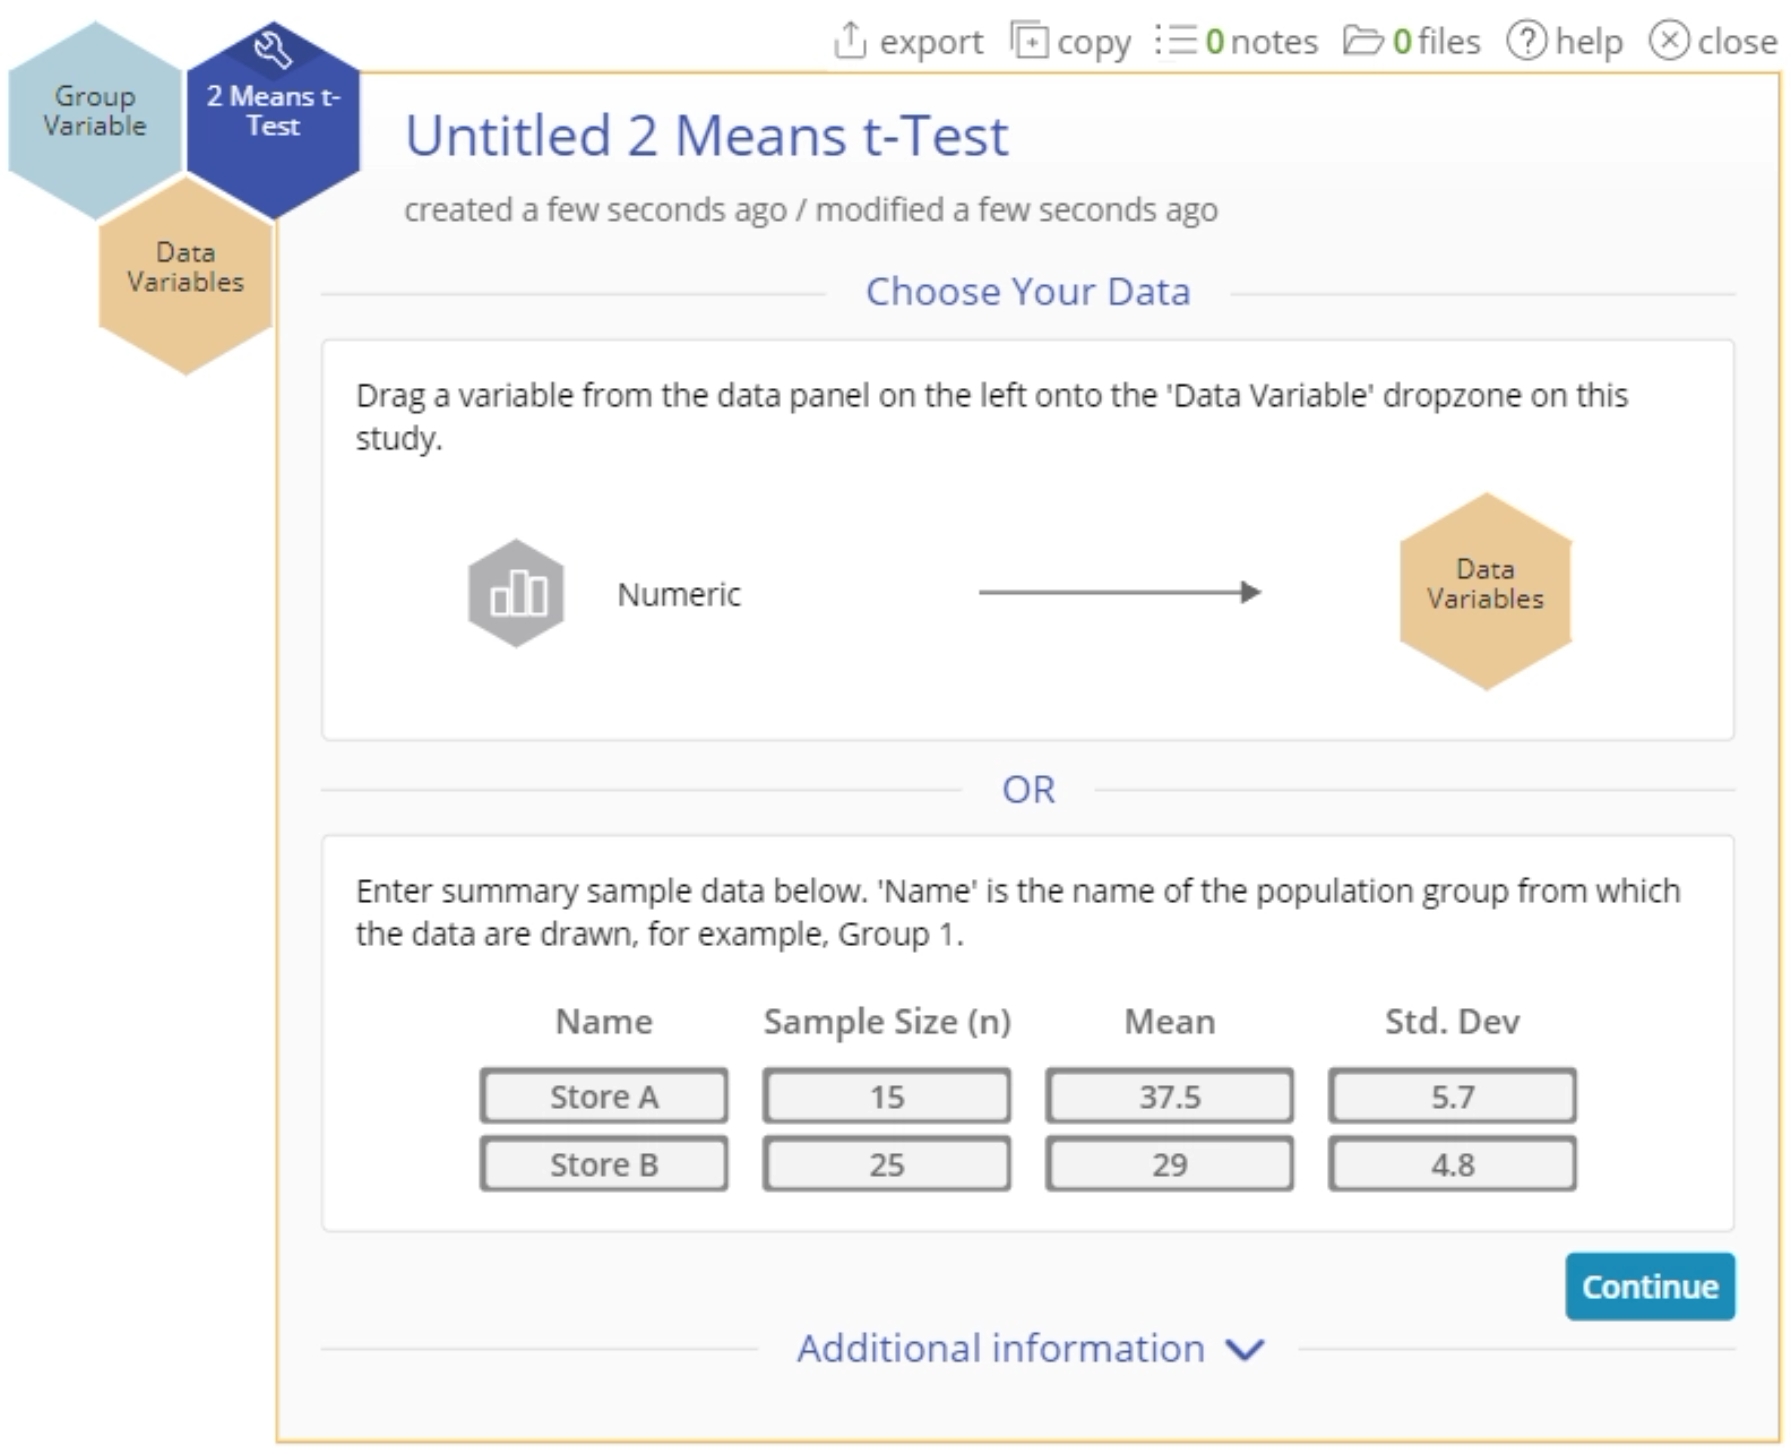 Sample 2 Means t-Test summary data.